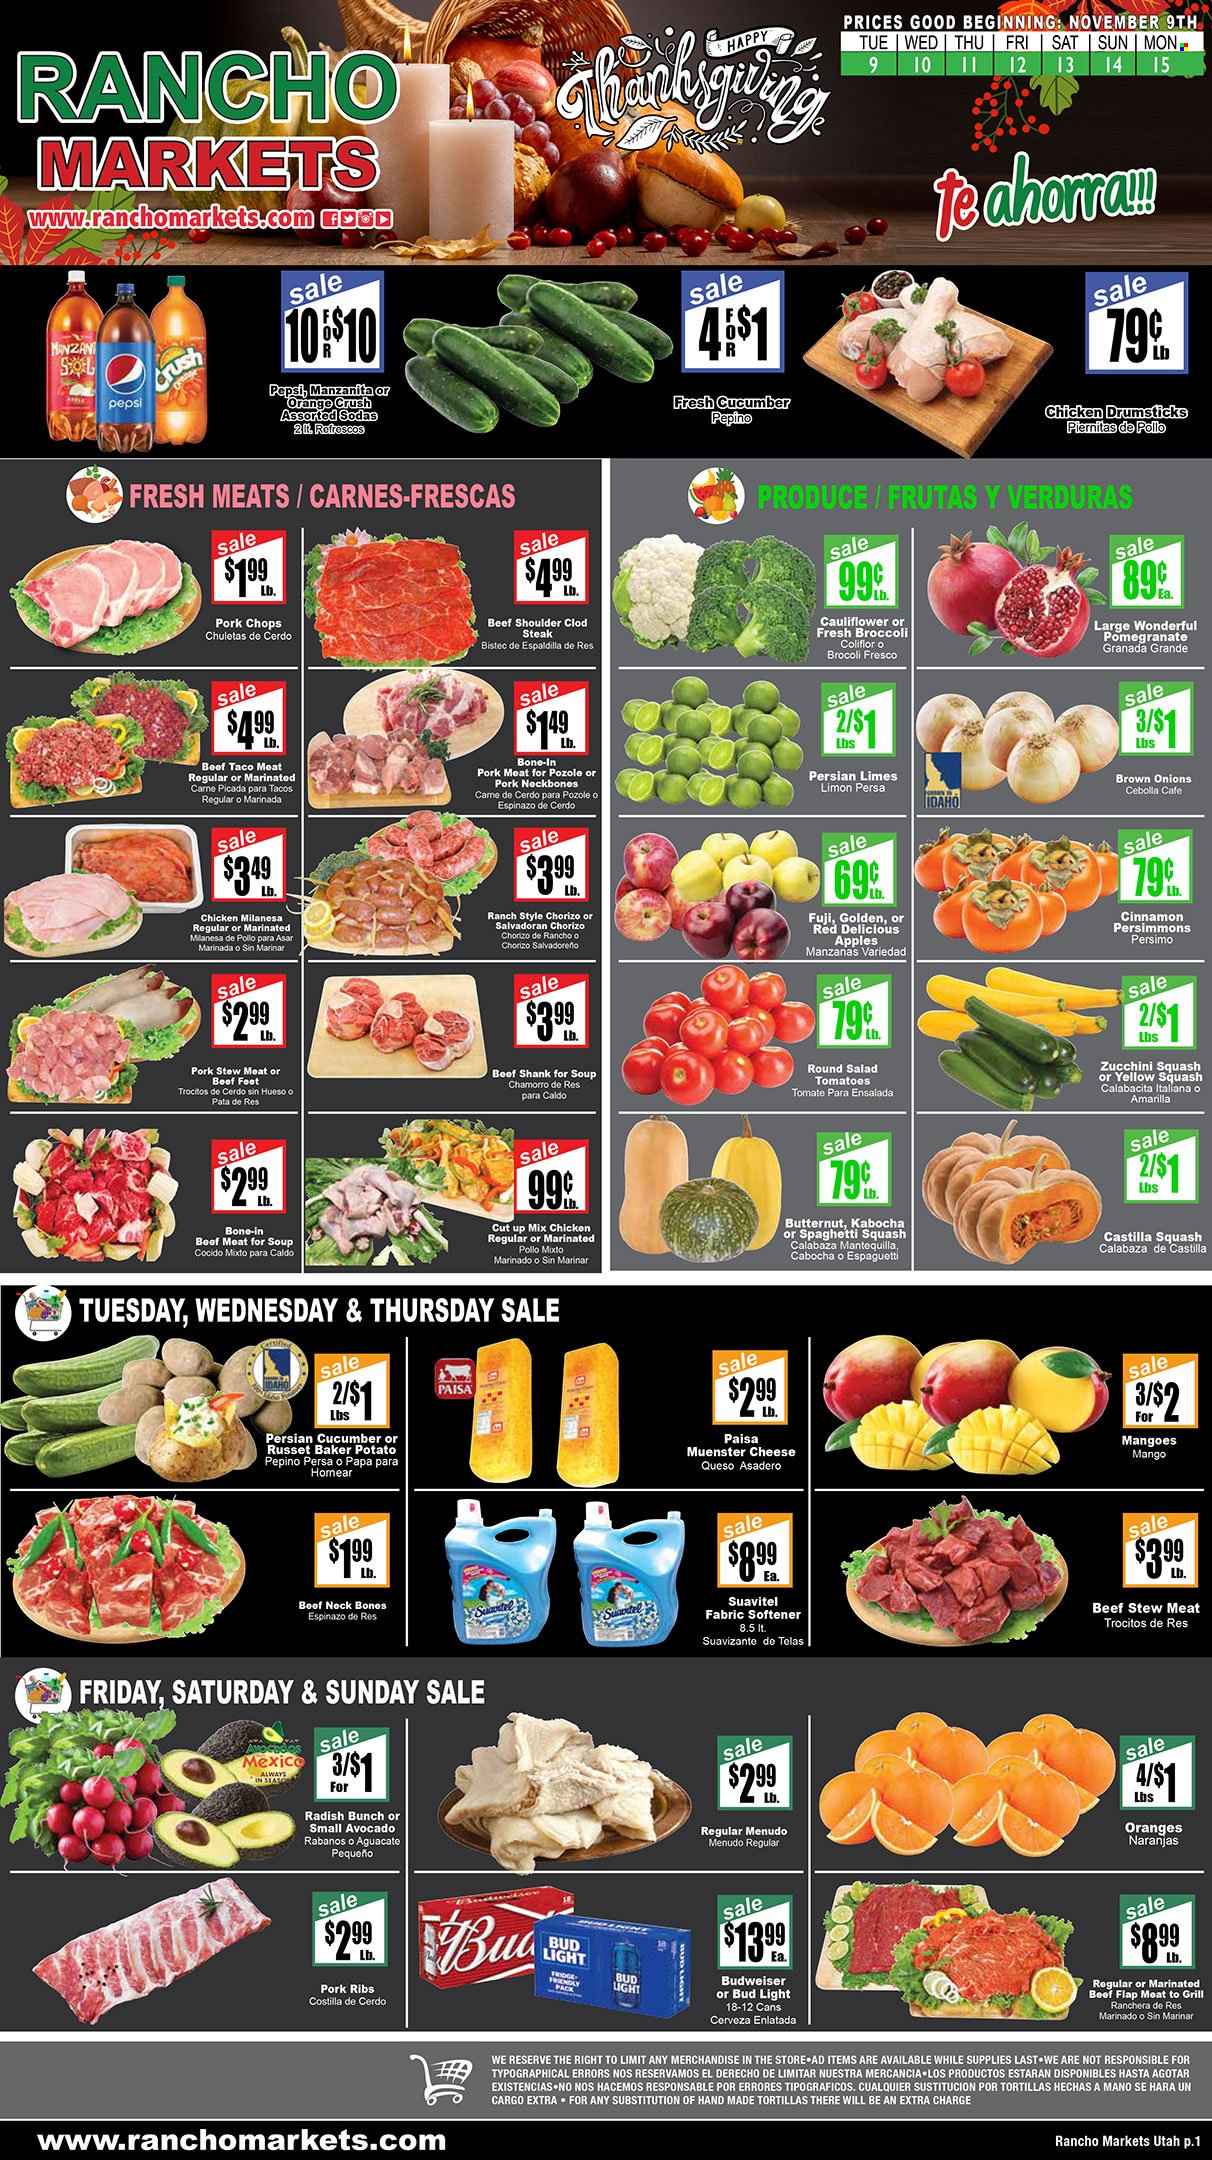 thumbnail - Rancho Markets Flyer - 11/09/2021 - 11/15/2021 - Sales products - stew meat, persimmons, tortillas, broccoli, cauliflower, radishes, russet potatoes, tomatoes, zucchini, pumpkin, salad, yellow squash, castilla squash, apples, avocado, limes, mango, Red Delicious apples, oranges, soup, chorizo, cheese, Münster cheese, cinnamon, Pepsi, soda, beer, Bud Light, chicken drumsticks, beef meat, beef shank, steak, marinated beef, pork chops, pork meat, pork ribs, fabric softener, Budweiser, butternut squash, pomegranate. Page 1.